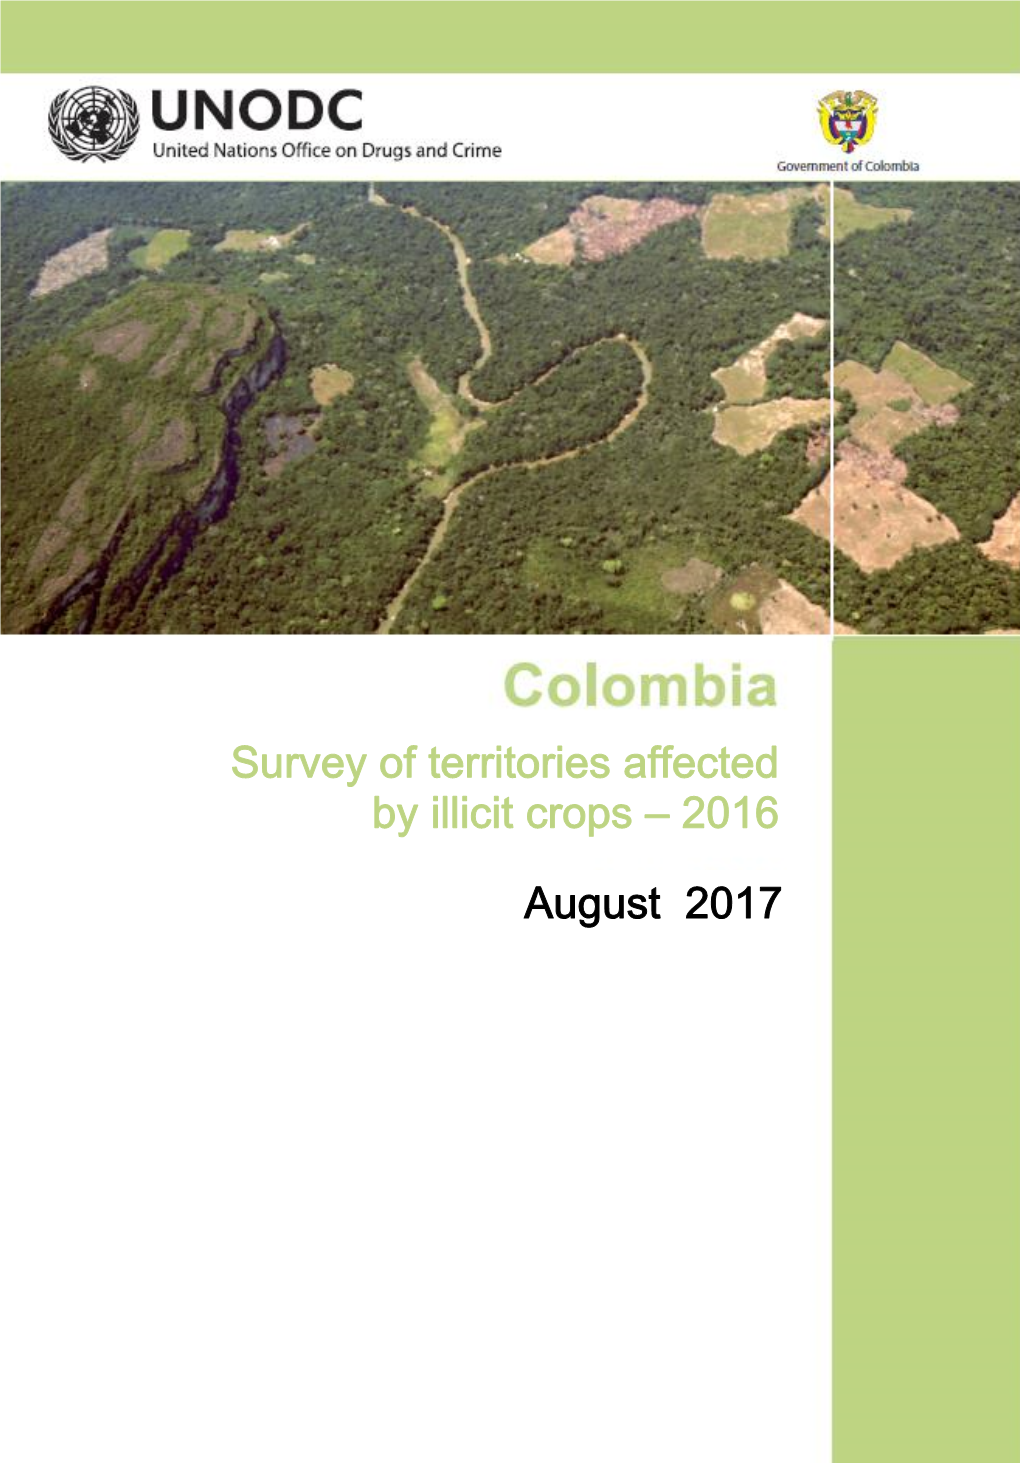 Colombia Coca Survey, As Well As the Preparation of This Report